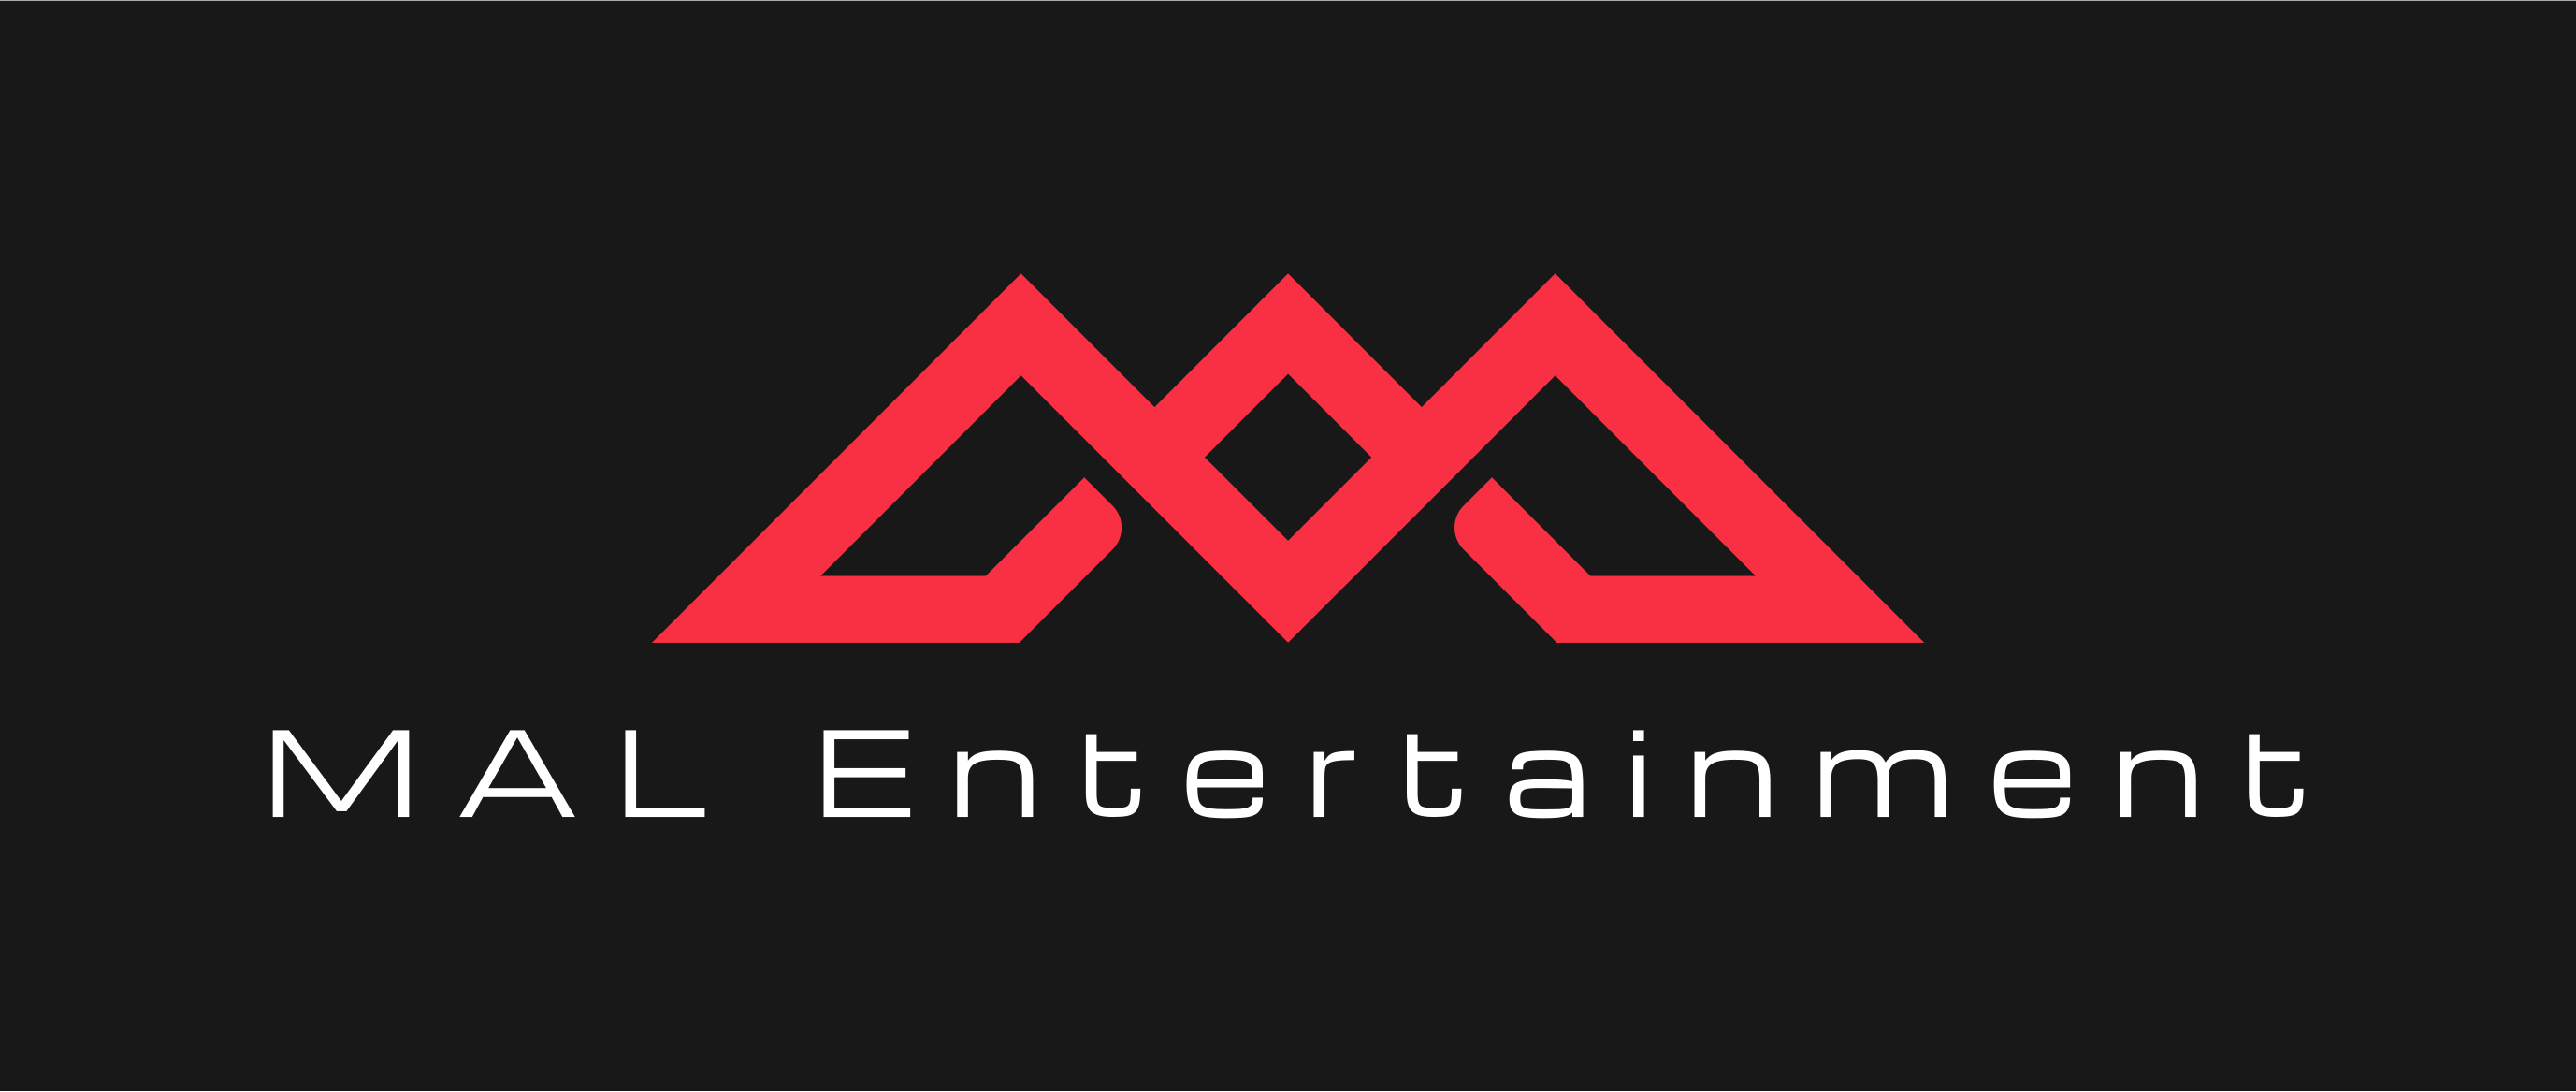 MAL Entertainment LED Screen Rentals Opens Its Doors in Austin Texas